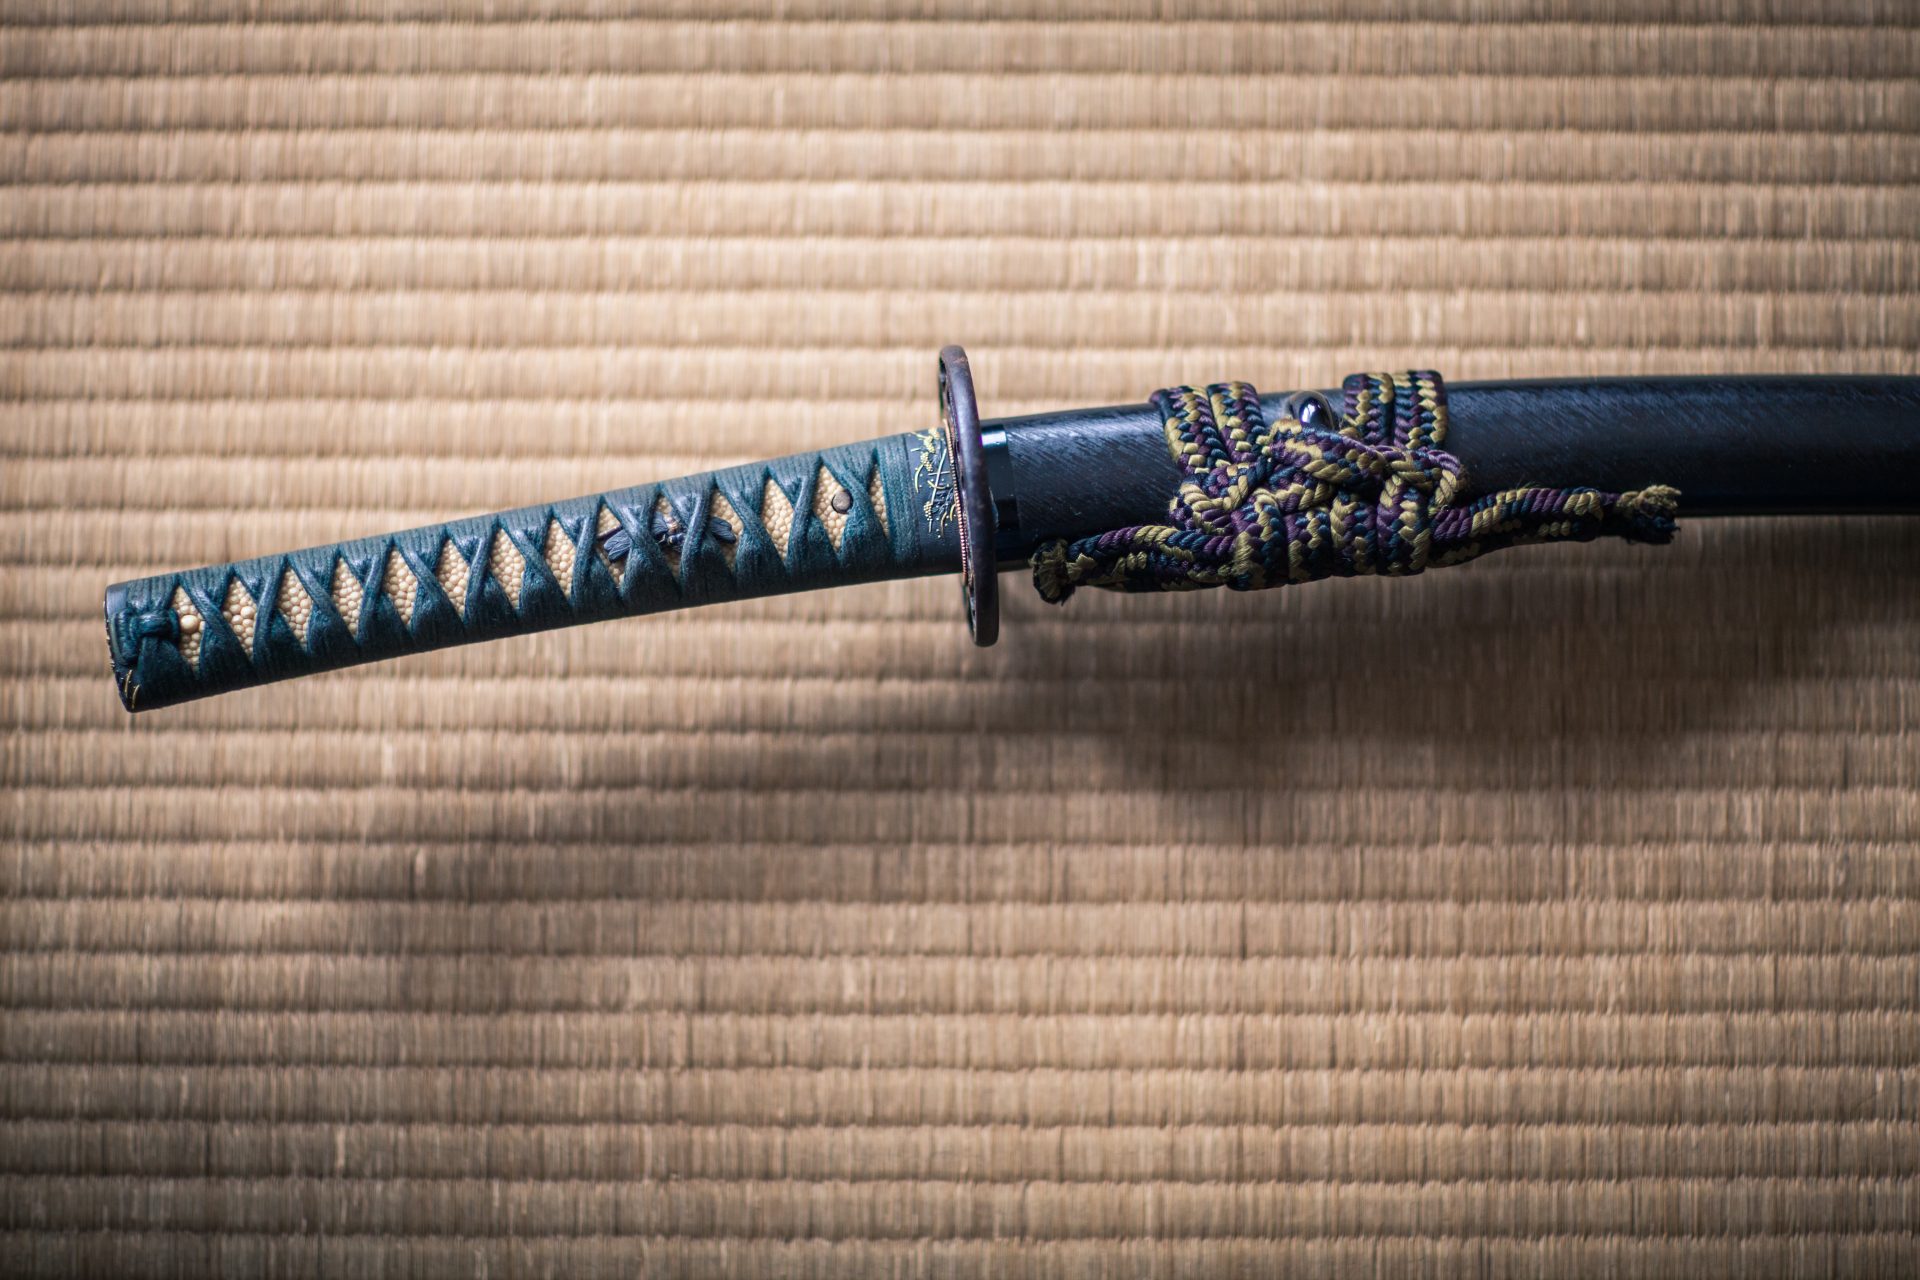 The discovery of an ancient sword changed Japanese history